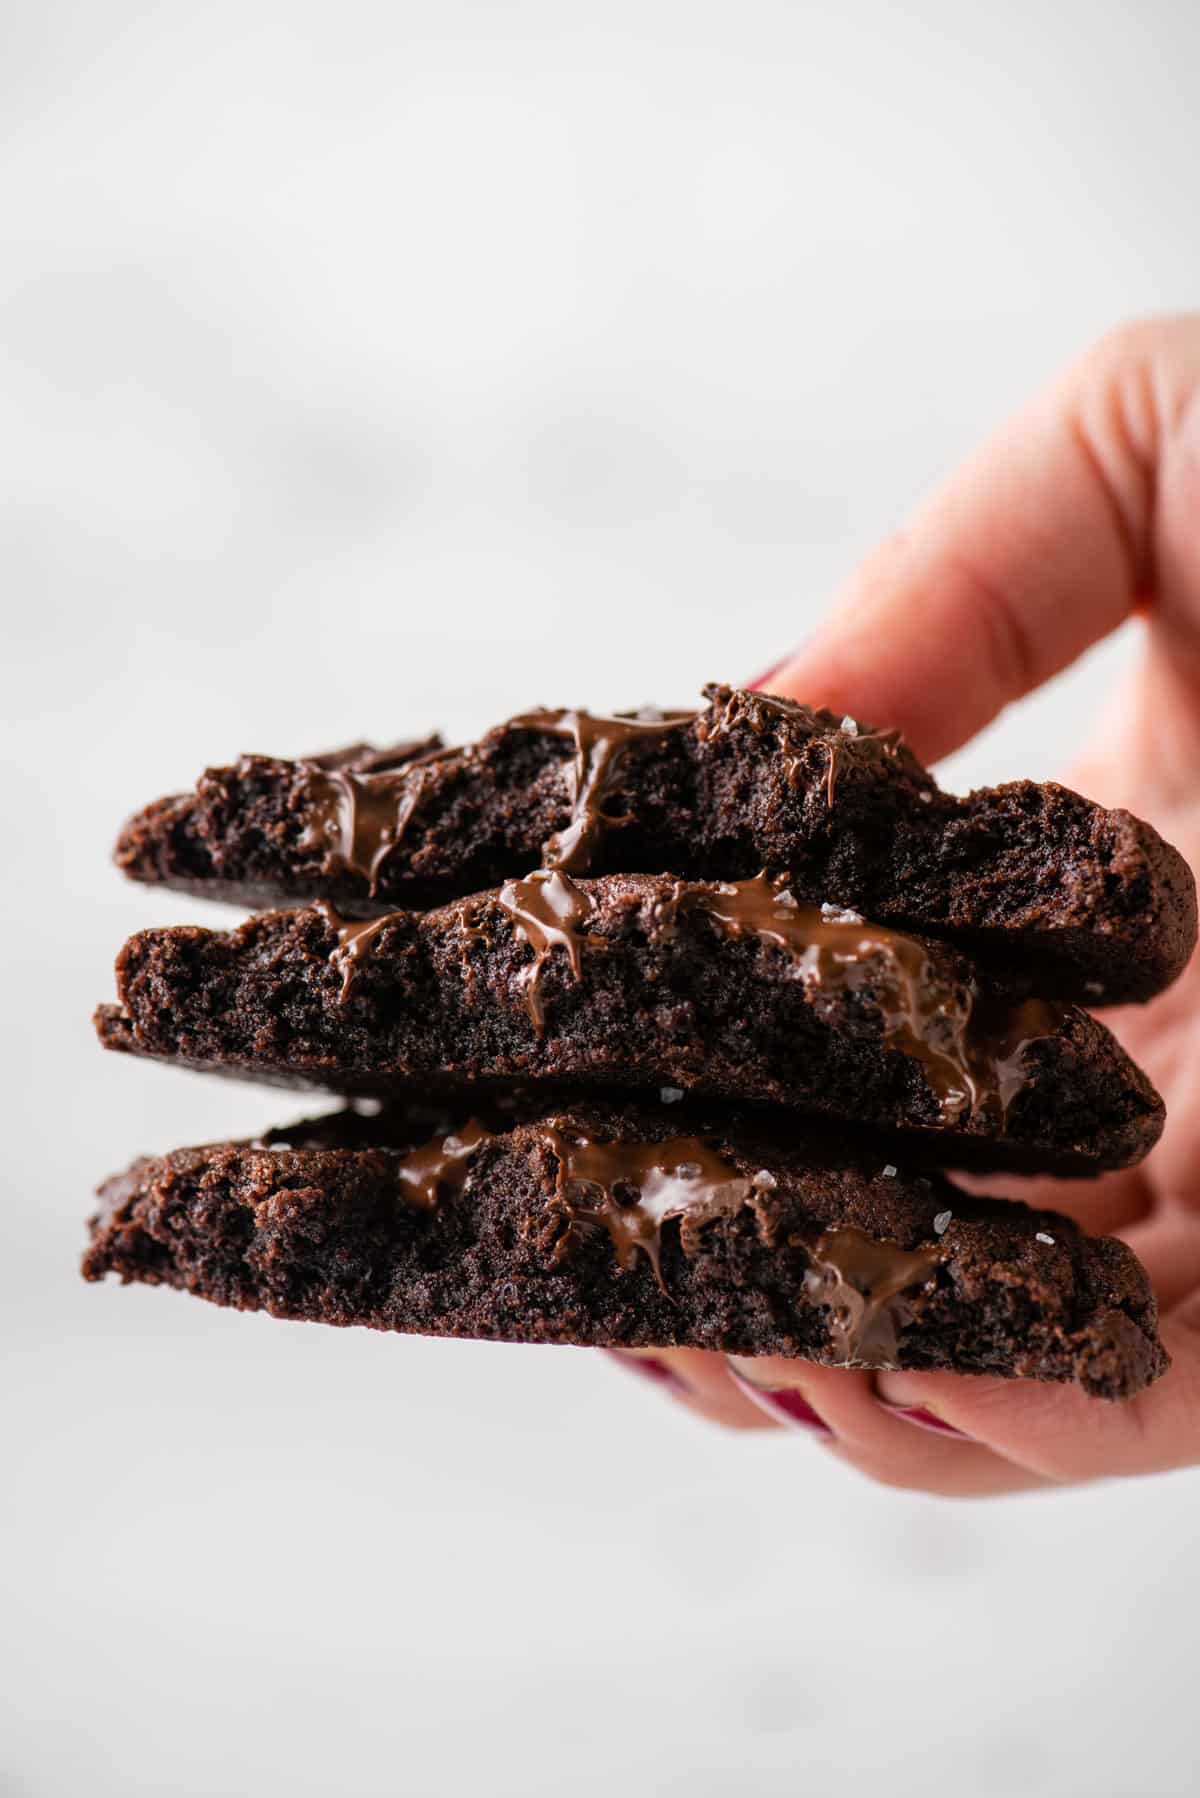 A hand holding three halves of chocolate cookies